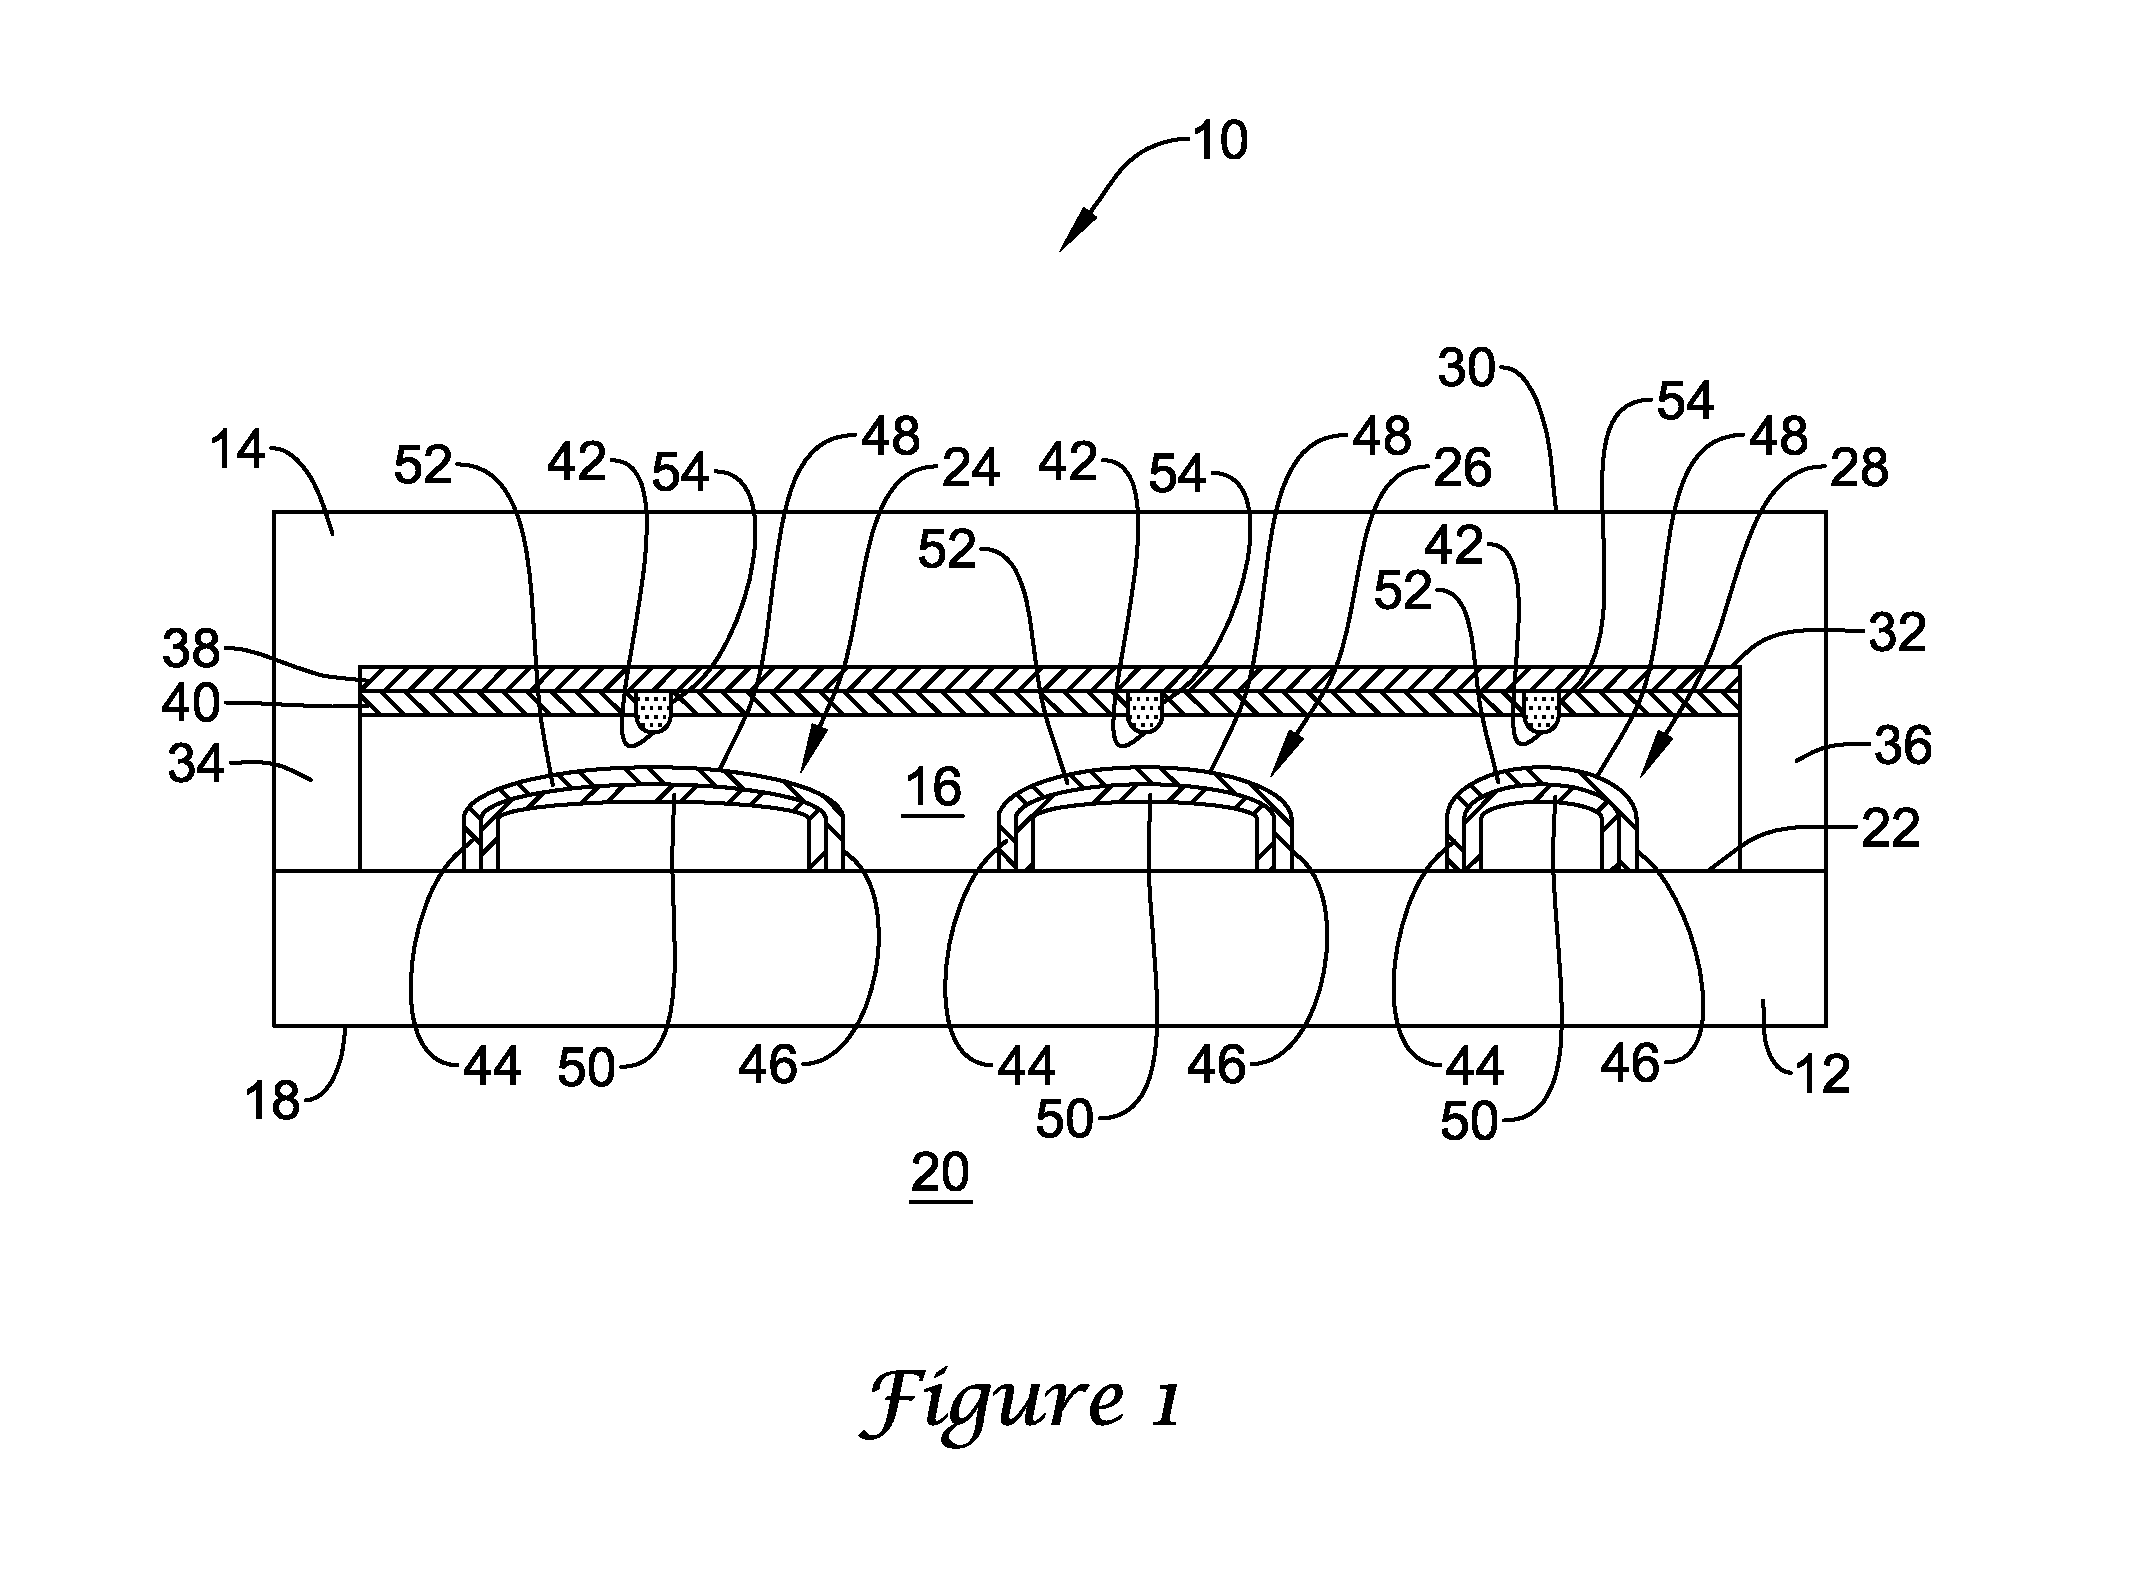 Passive analog thermal isolation structure